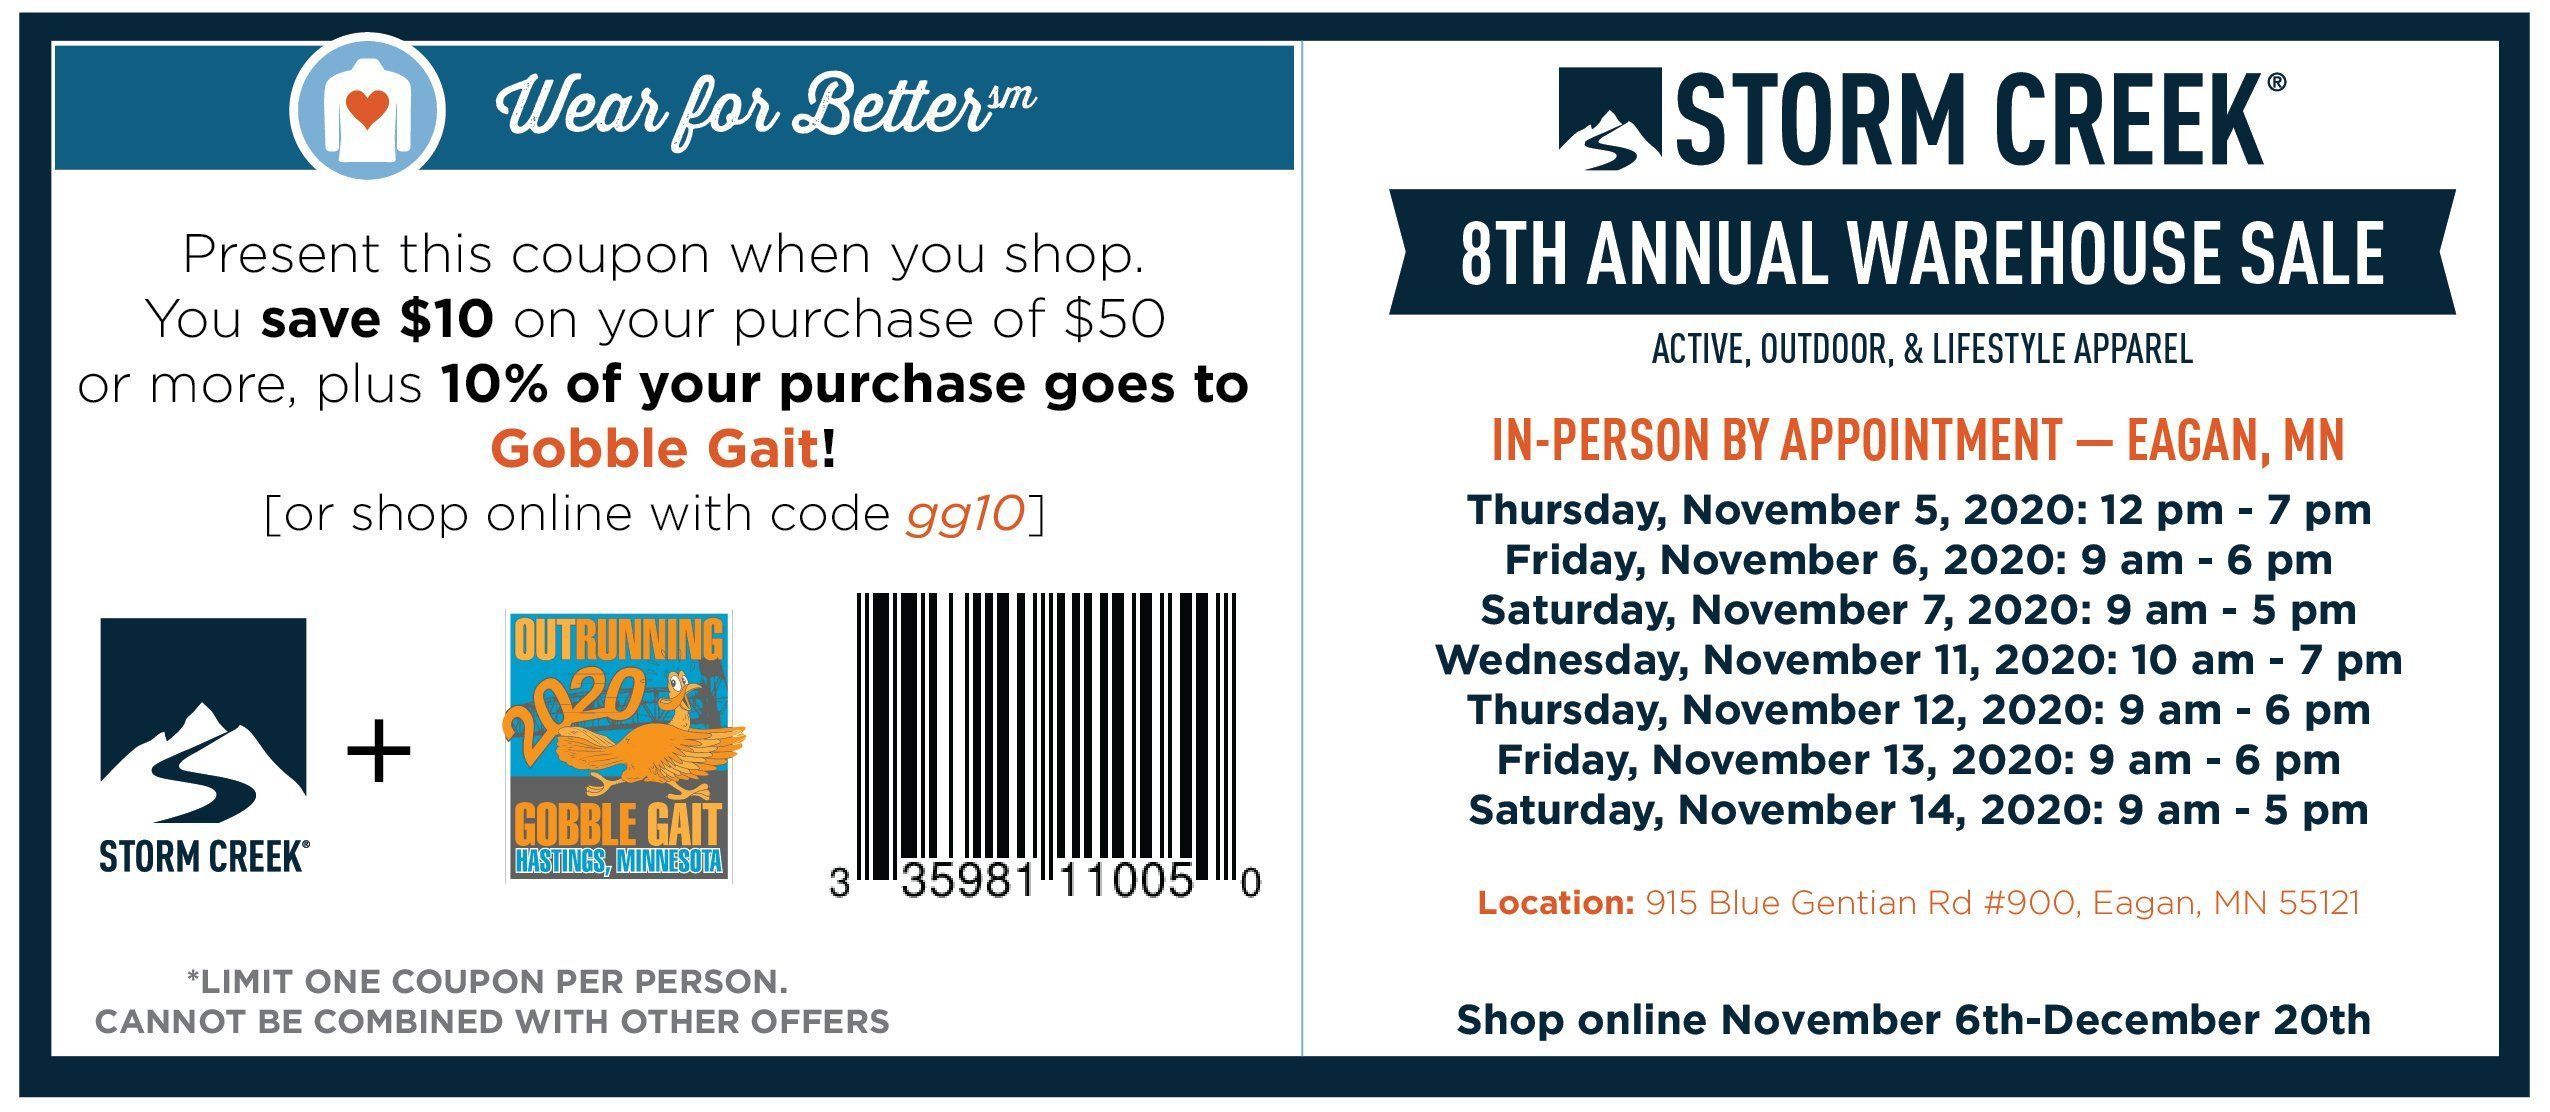 Use a Gobble Gait Coupon at the Storm Creek Warehouse Sale!